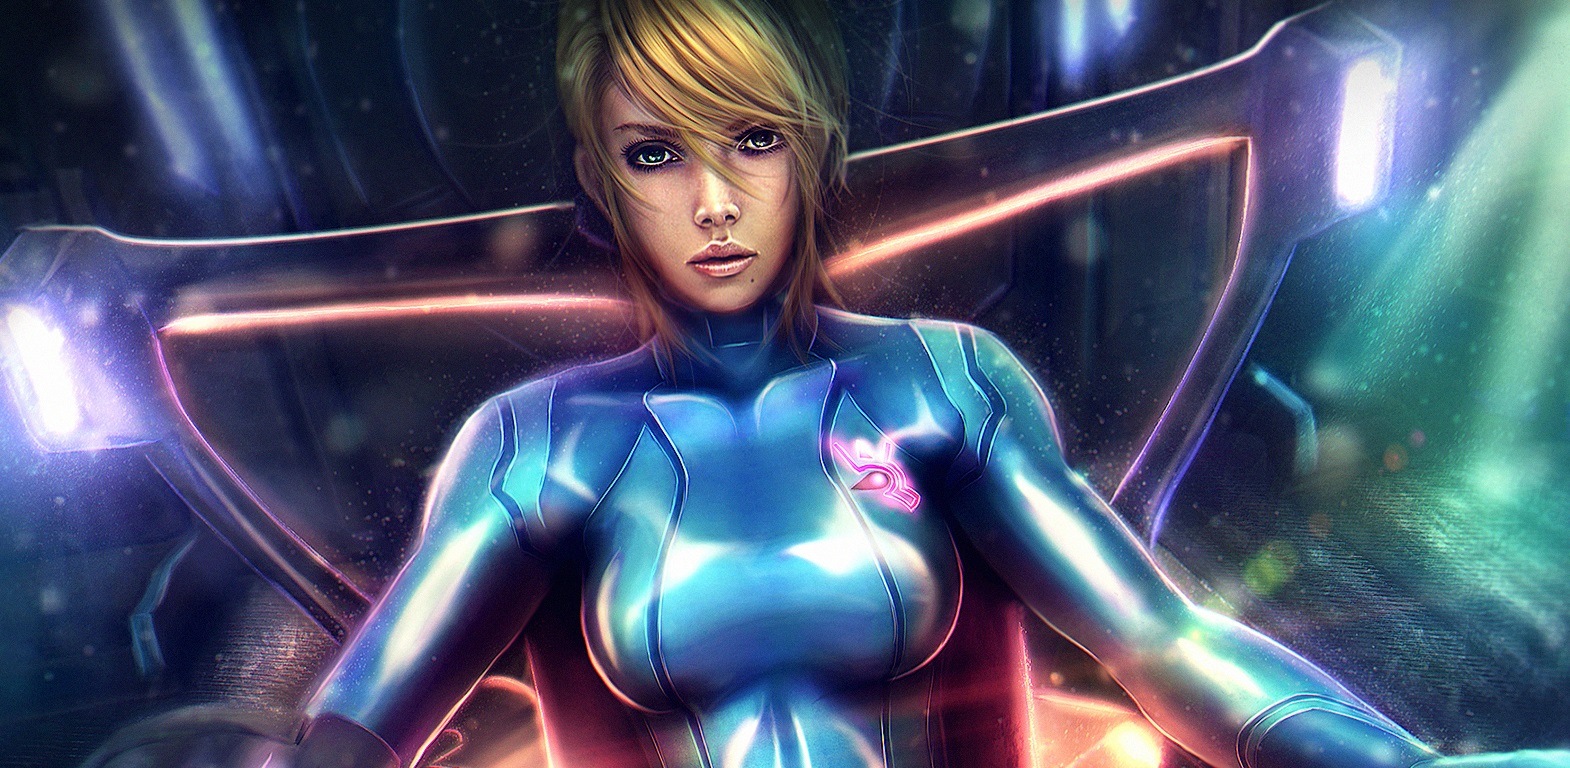 samus__i_can_see_you___metroid_by_class34-d5rqzvb